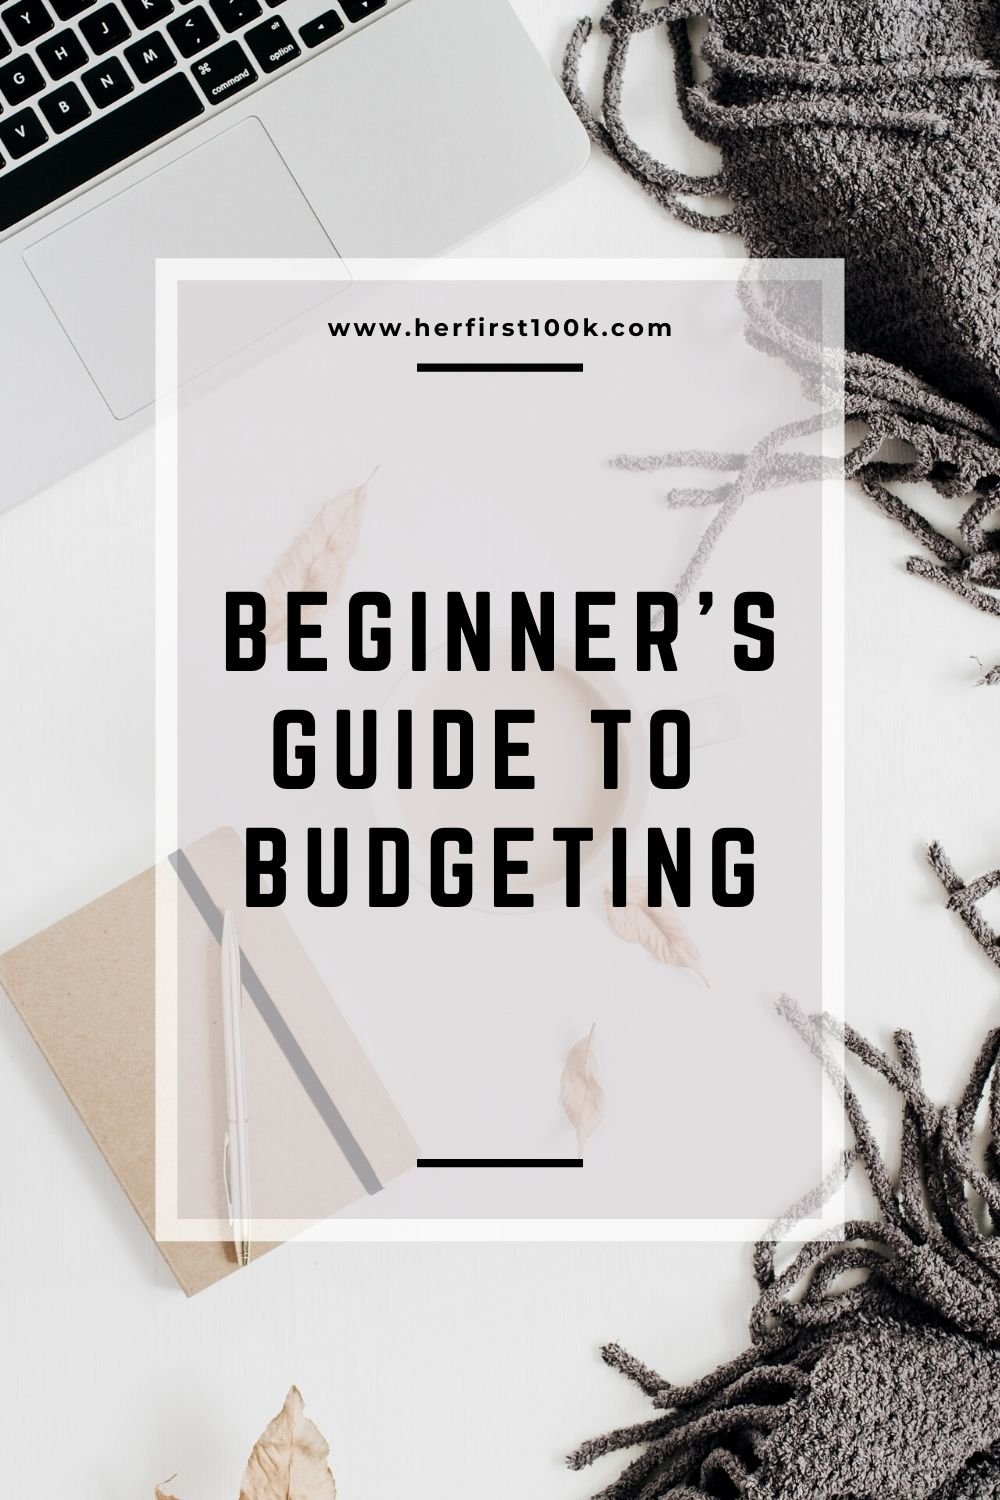 A desk with a pen, notebook, and blanket with text Beginner's Guide to Budgeting